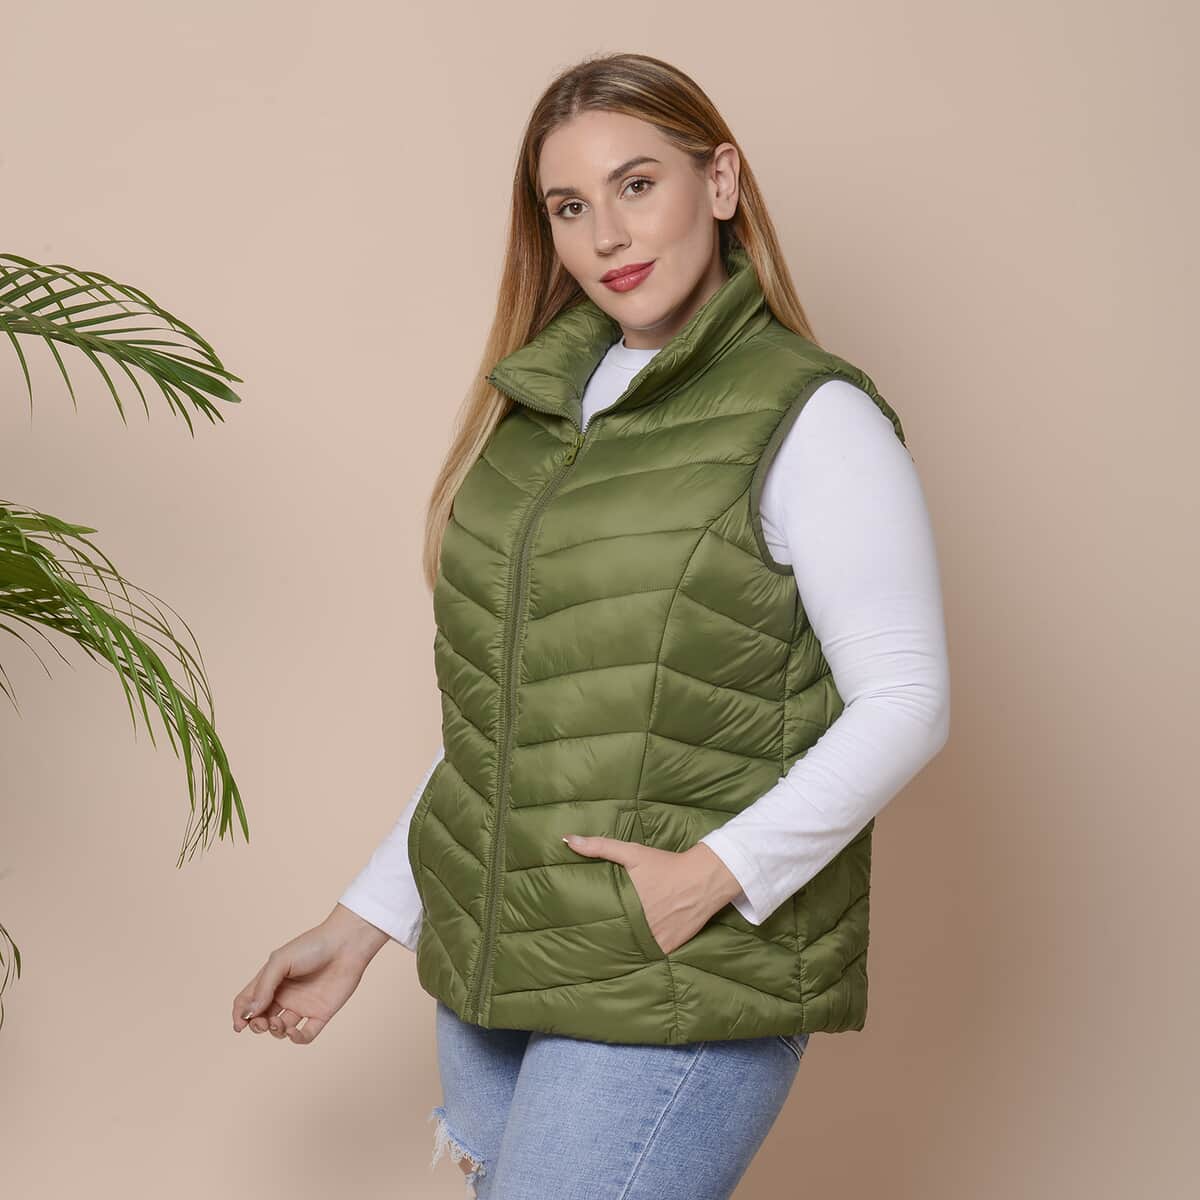 Passage Olive Green Women's Zip Front Puffer Vest with Pockets - L image number 2